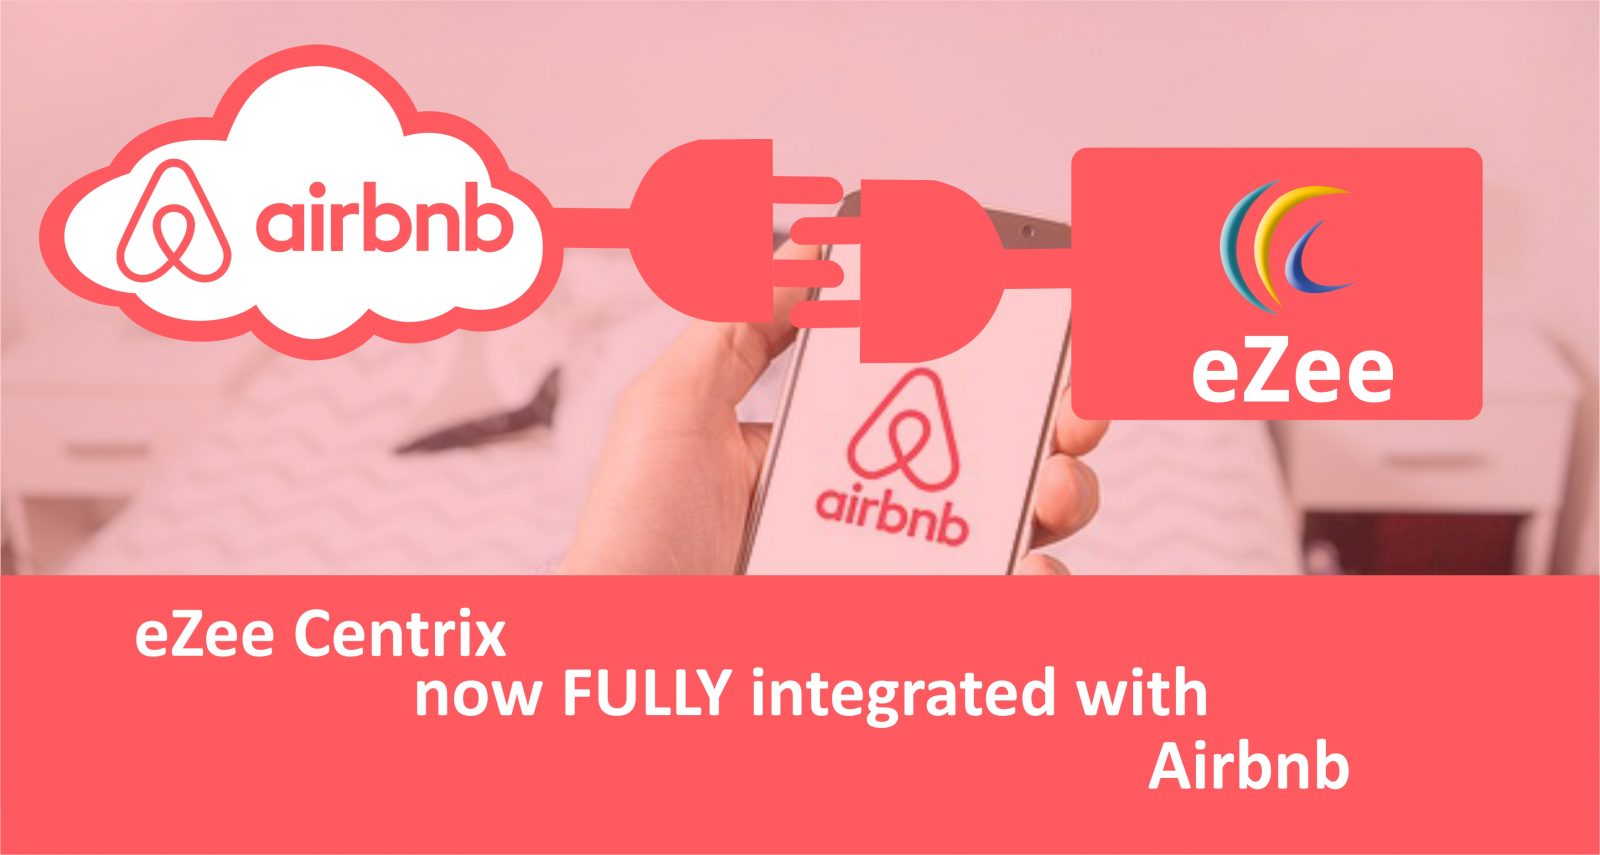 eZee Centrix Now Fully Integrated with Airbnb